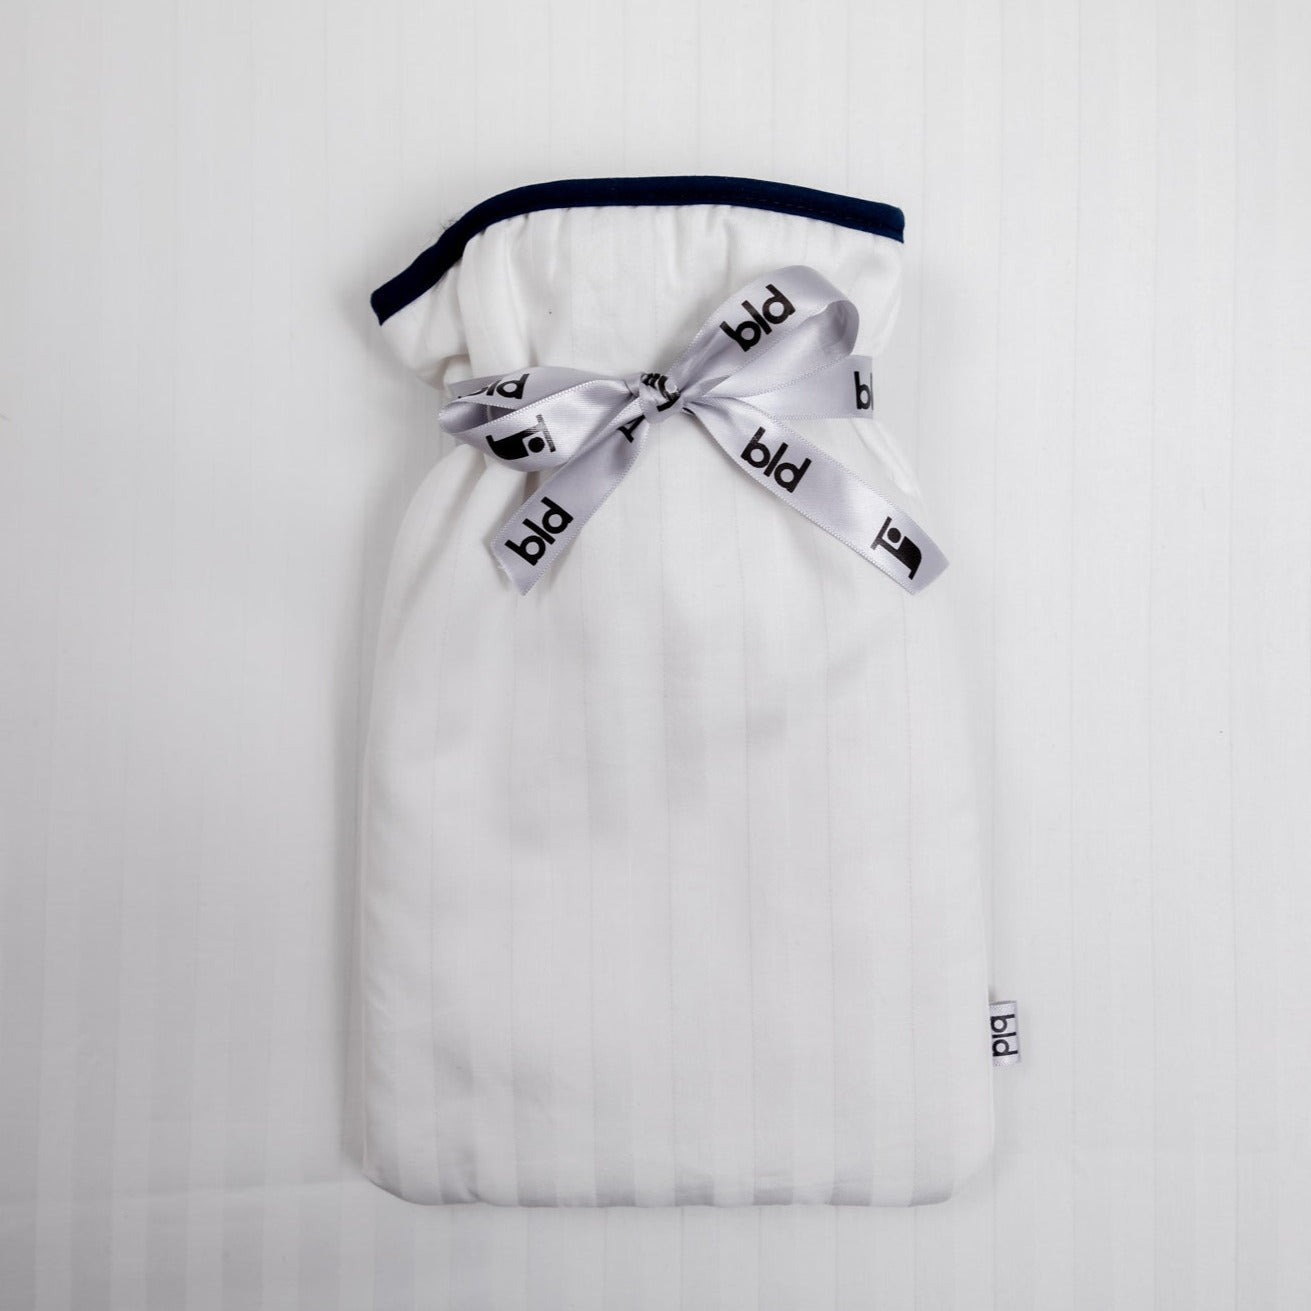 Mini hot water bottle with cosy soft white cover padded